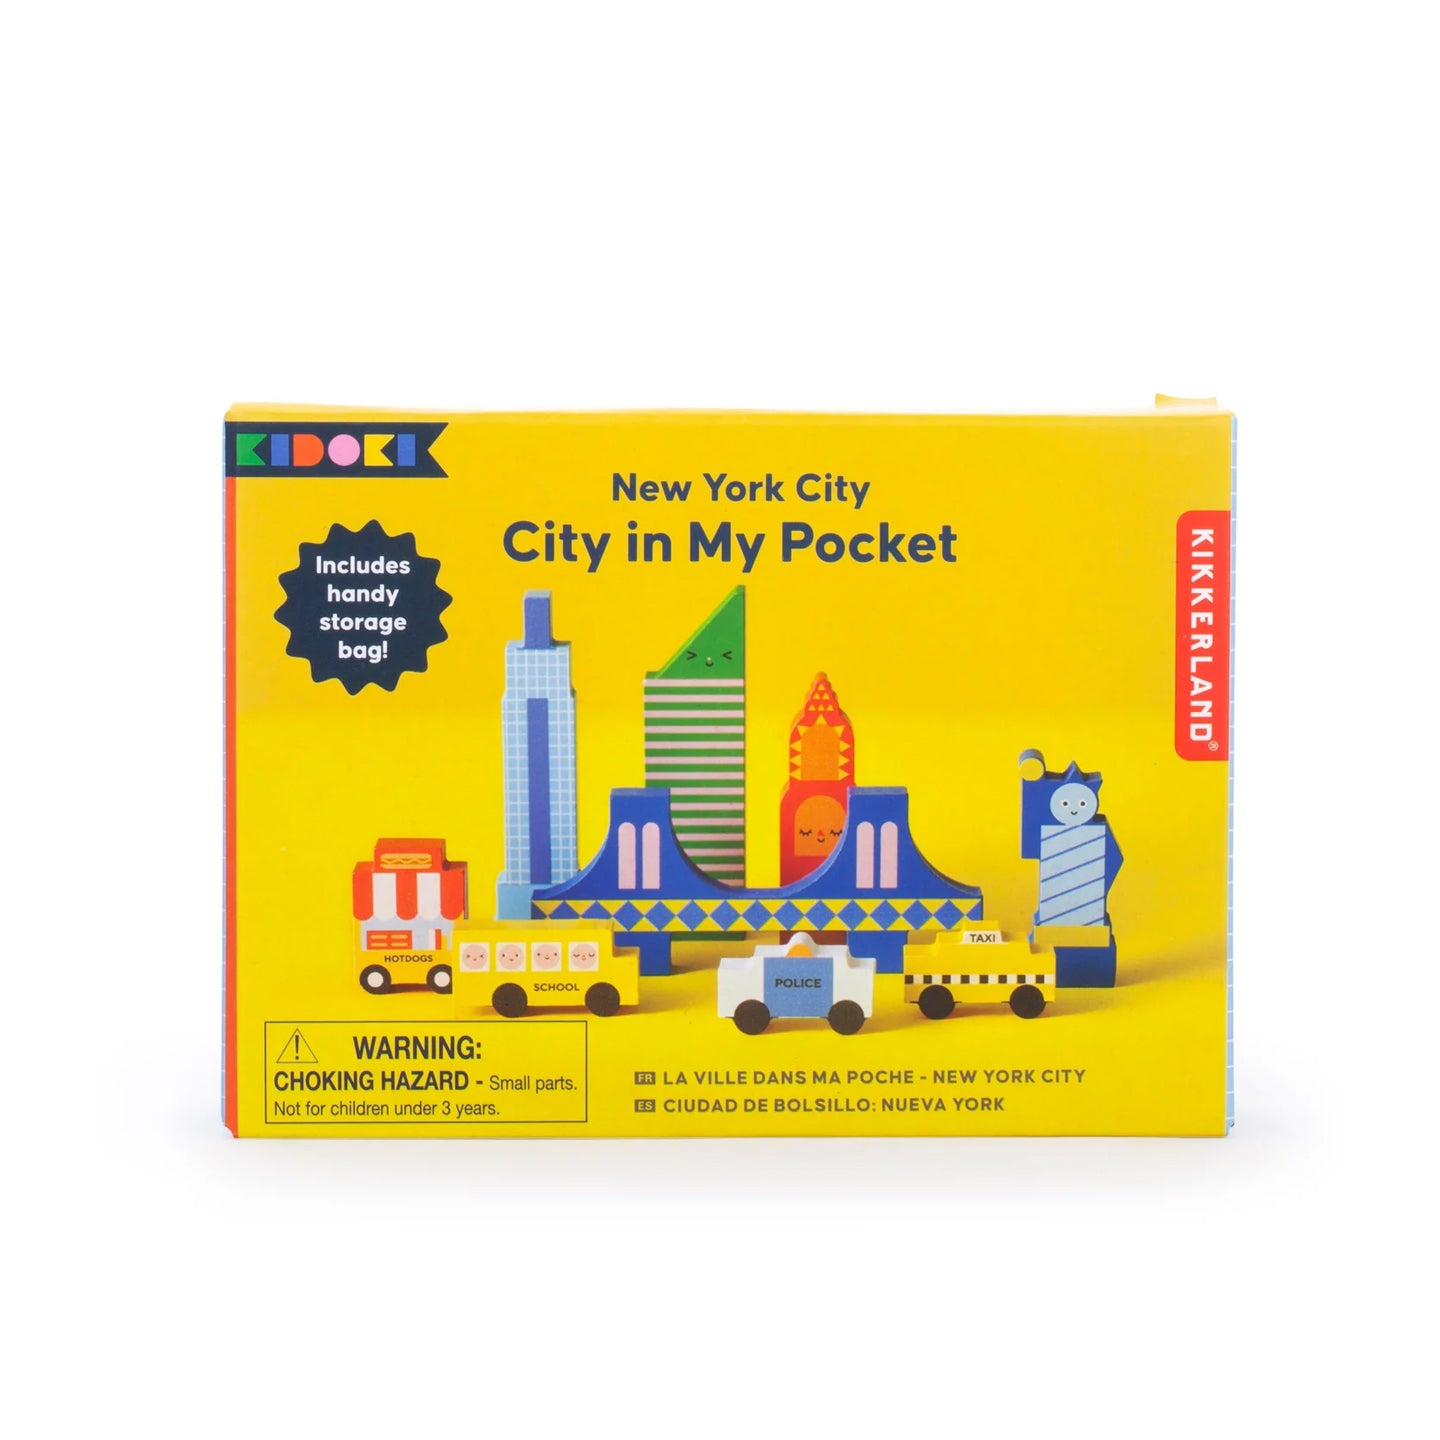 NYC City in My Pocket